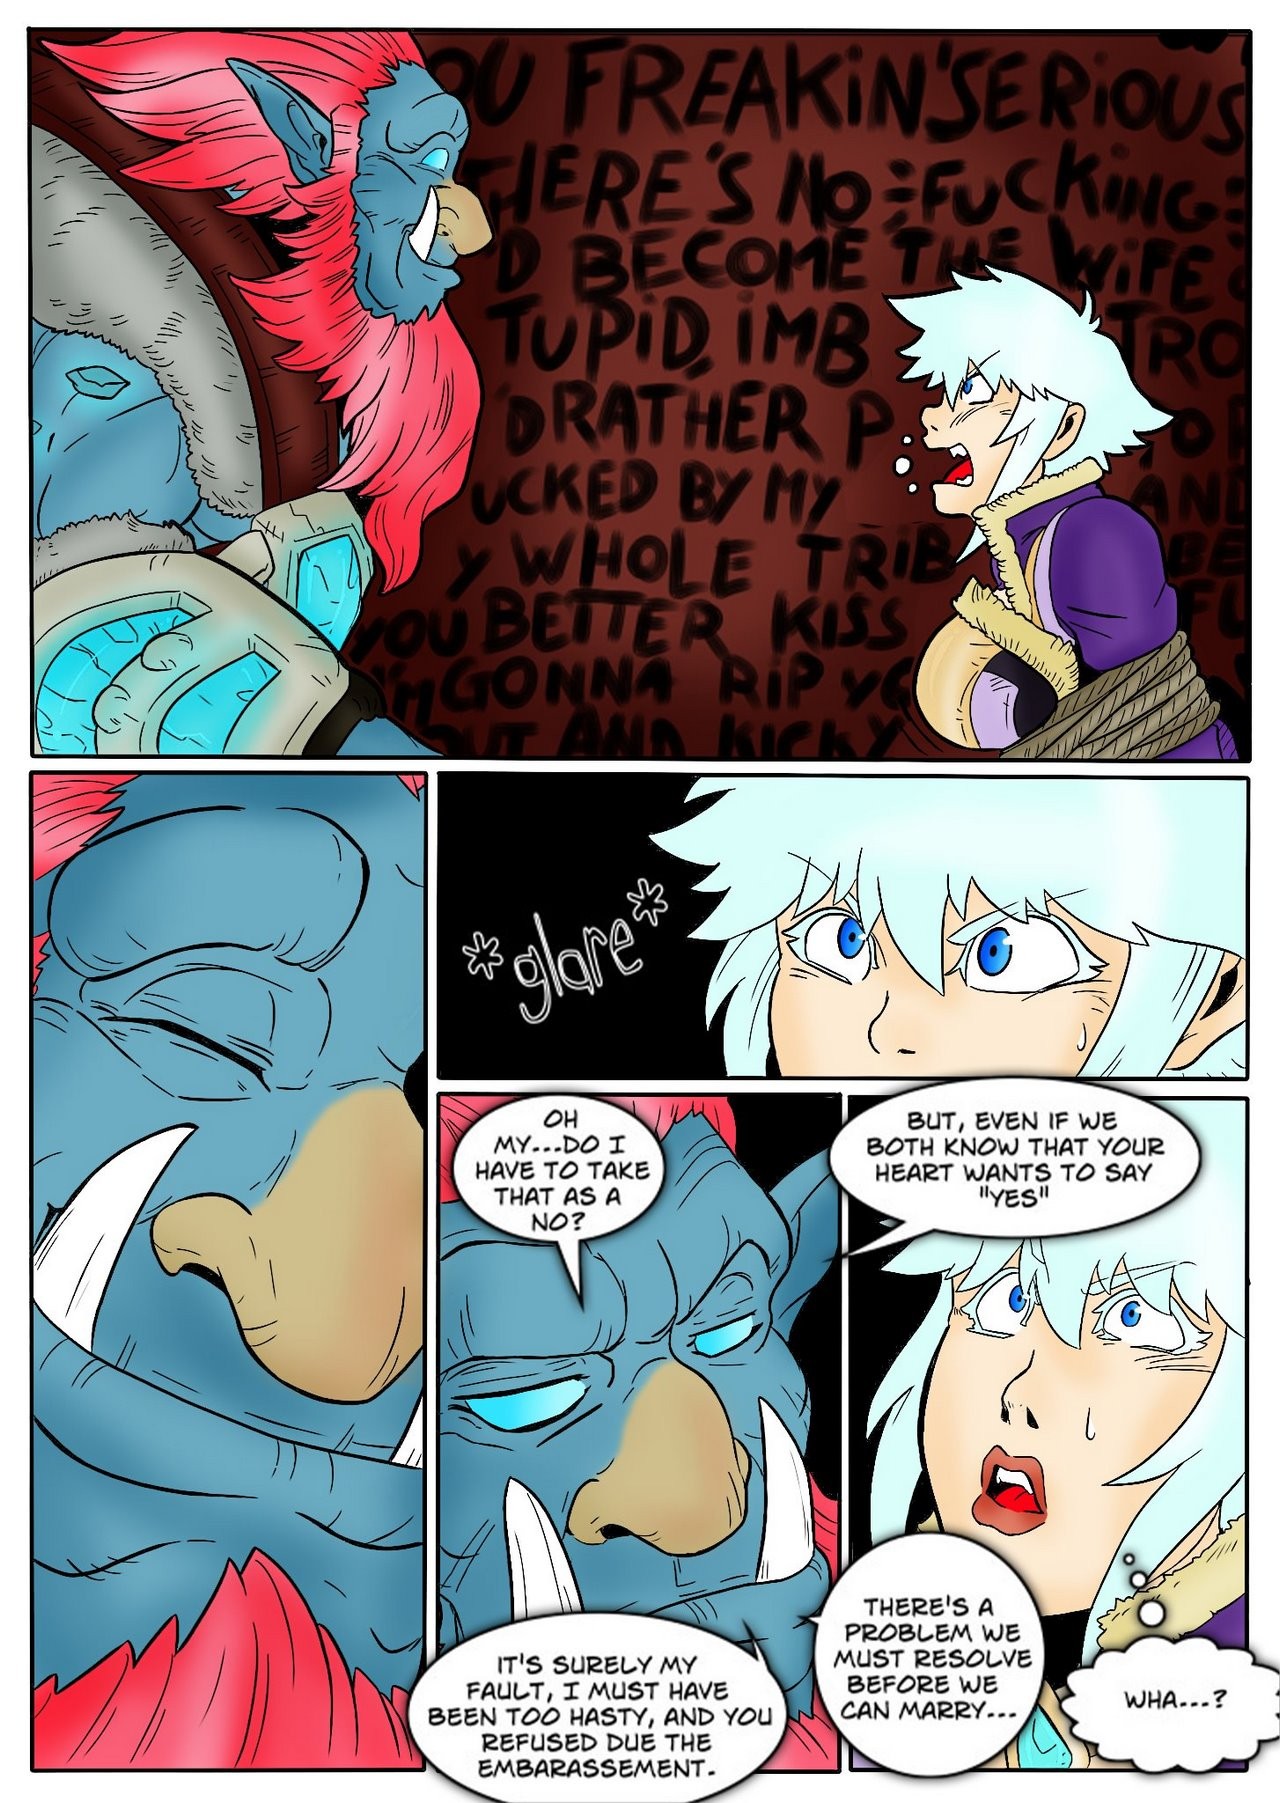 Tales of the Troll King ch. 1 - 3 ] [Colorized] porn comic picture 24